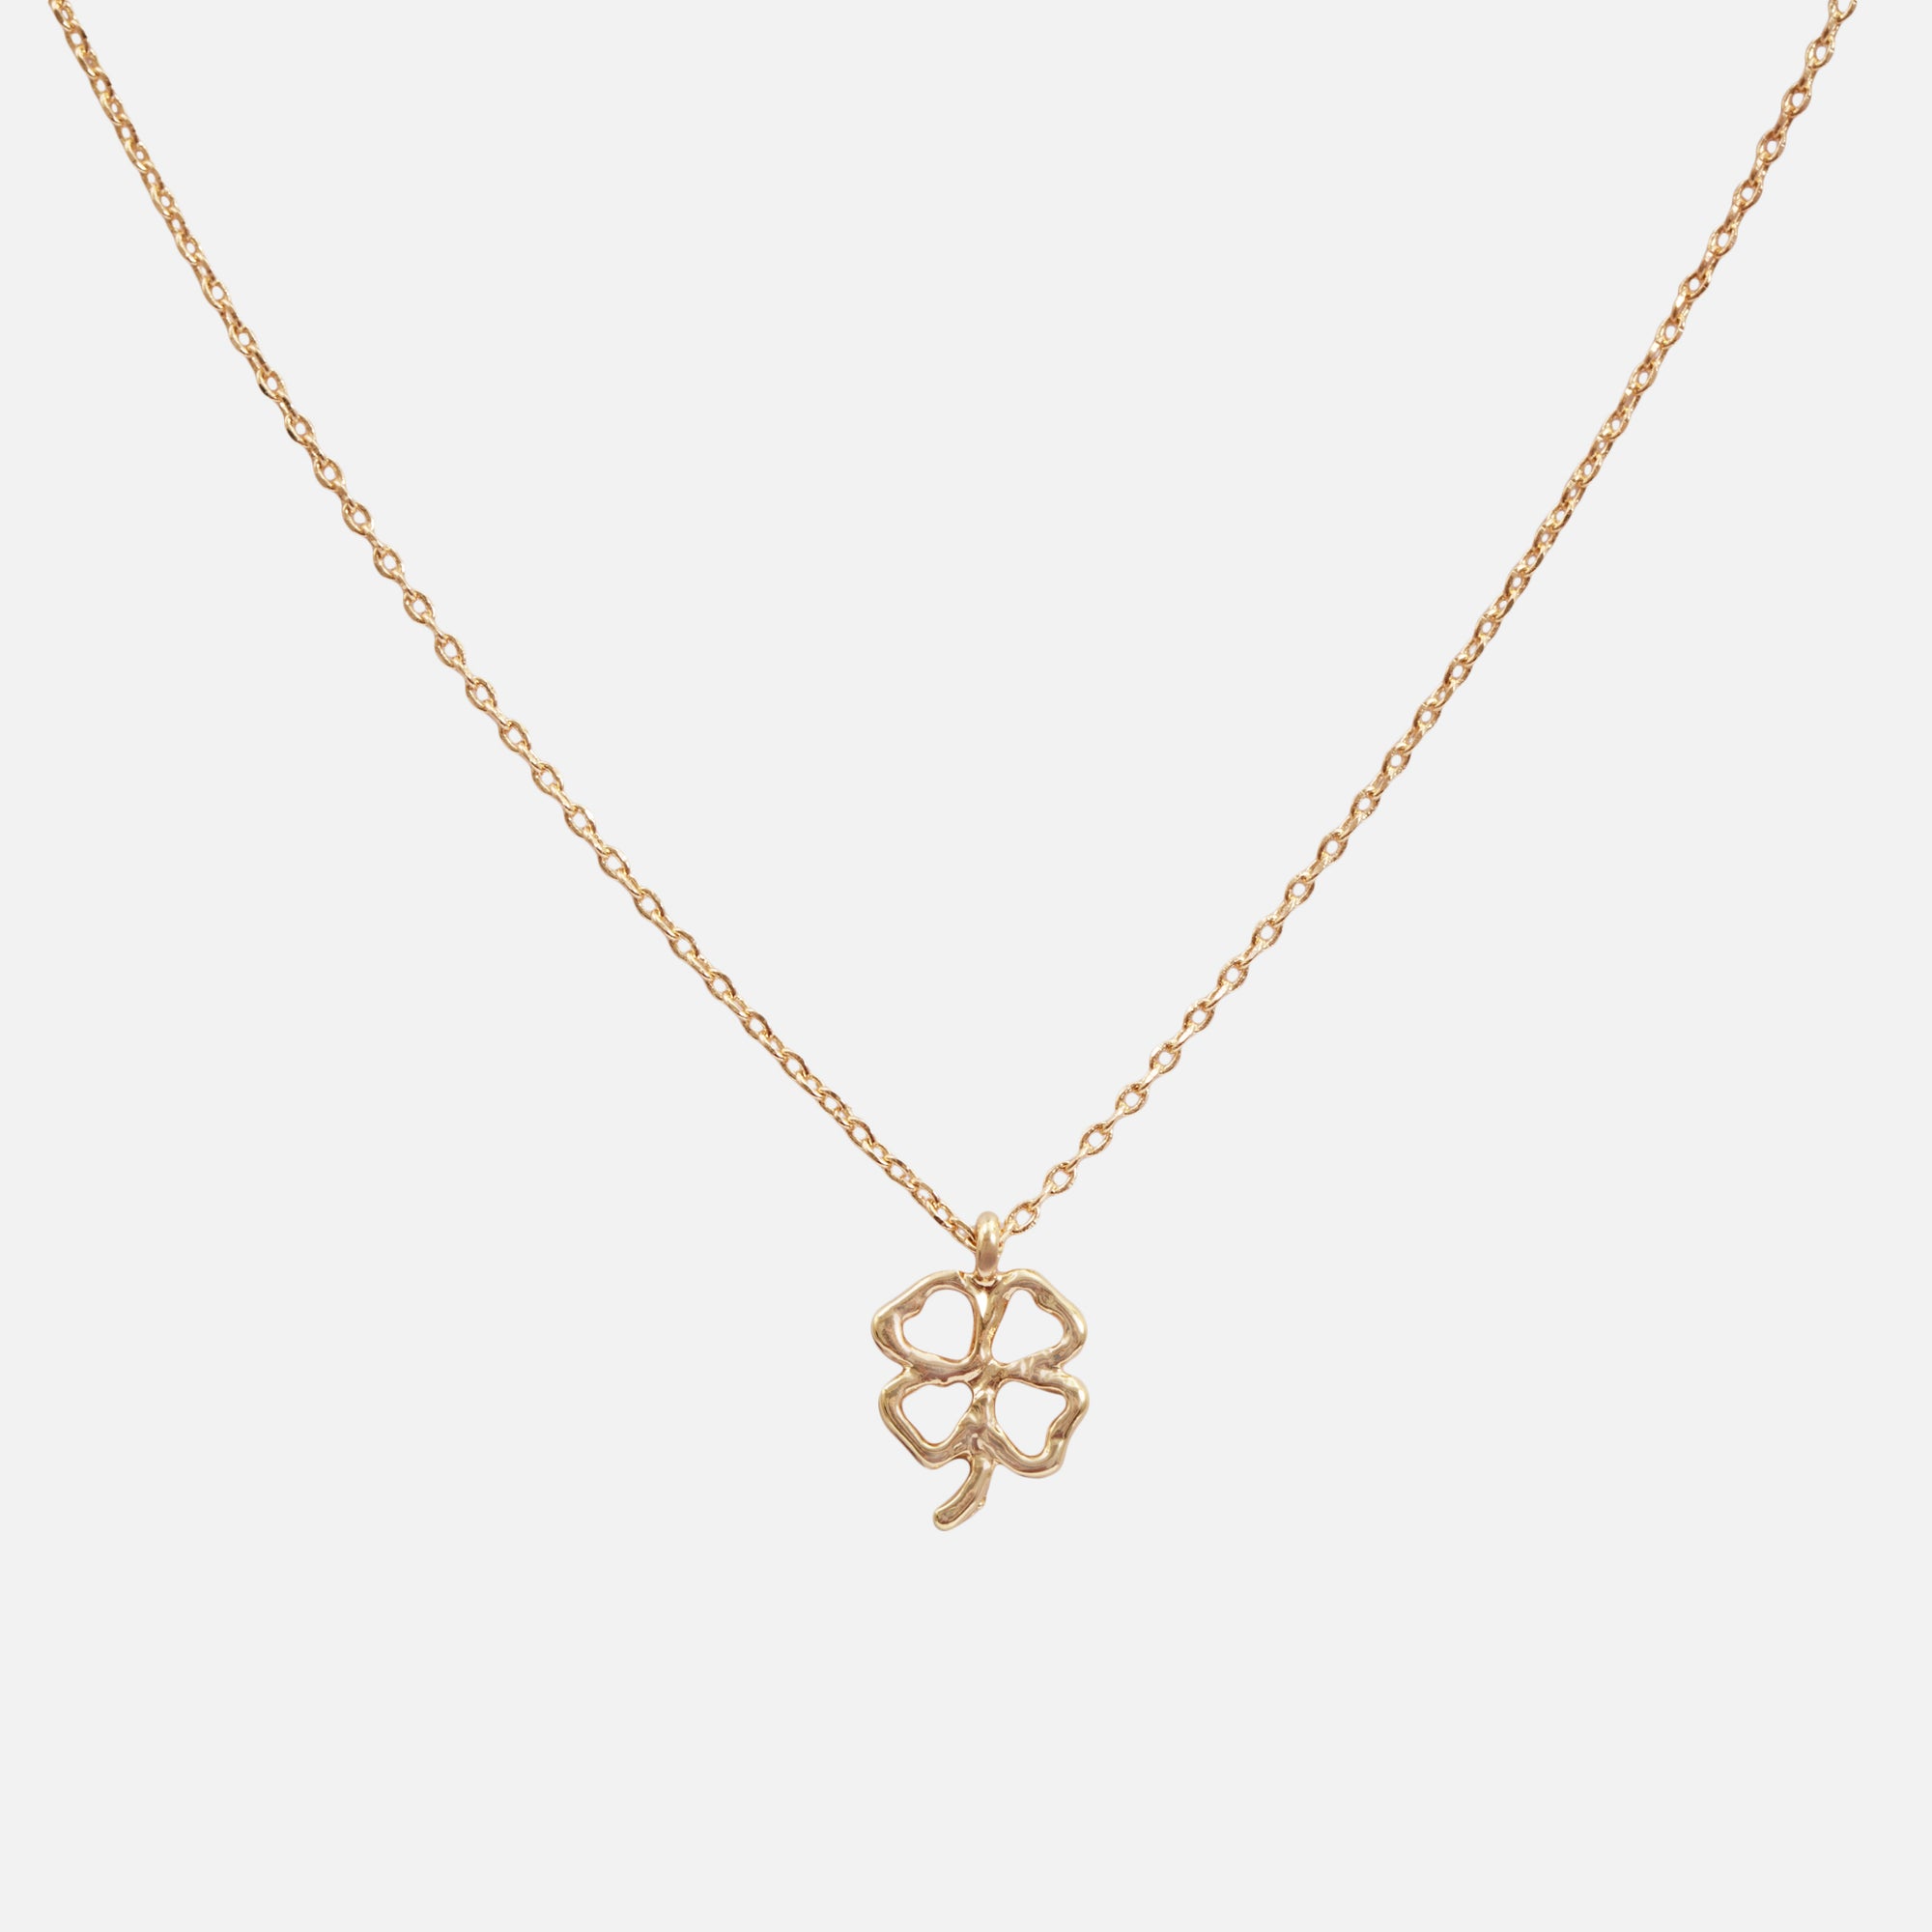 Golden necklace with lucky clover charm 